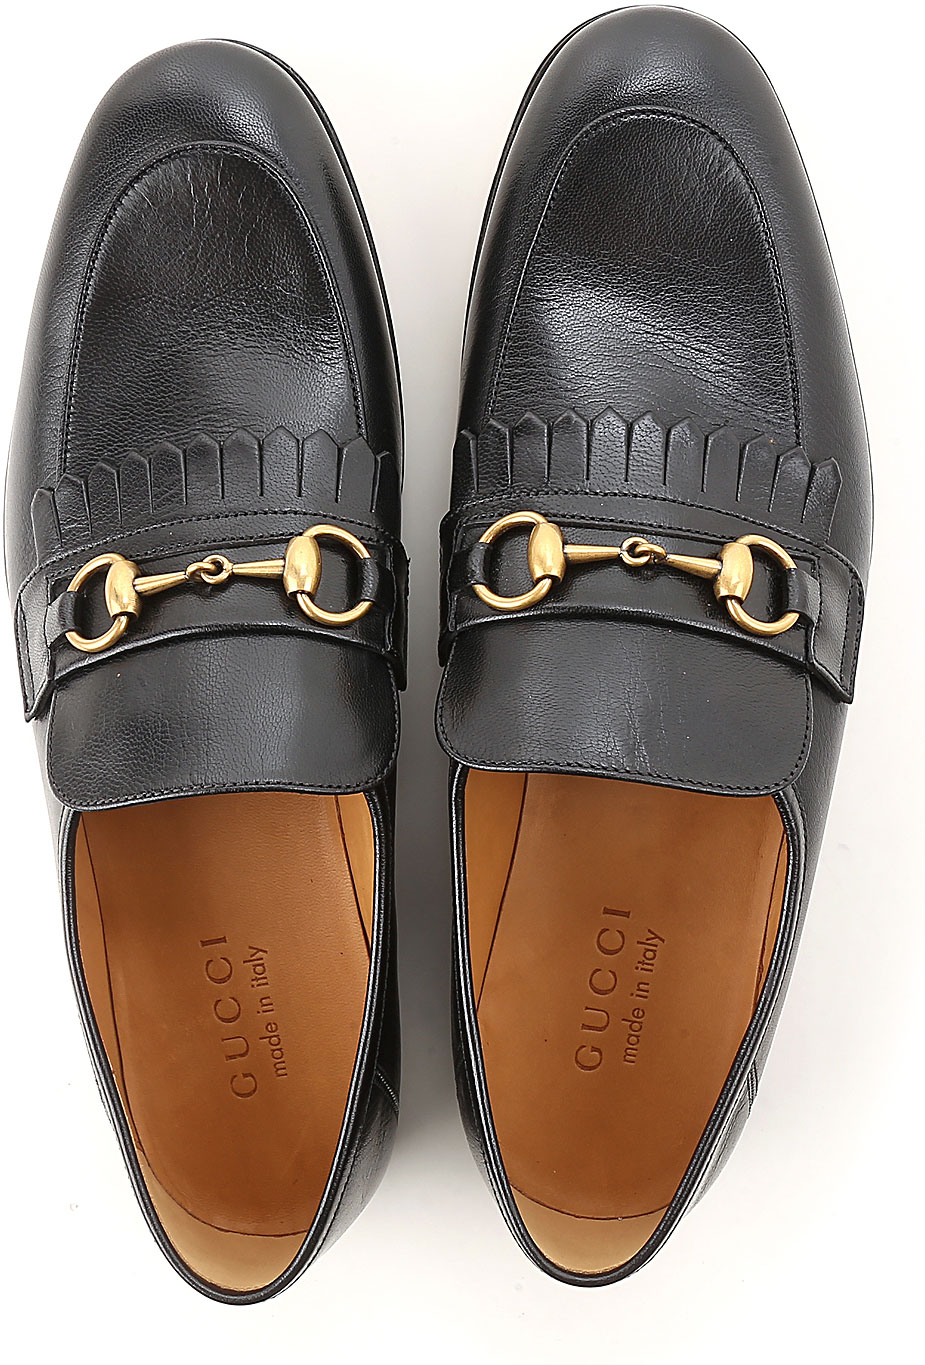 Mens Shoes Gucci, Style code: 494652-d3v00-1000